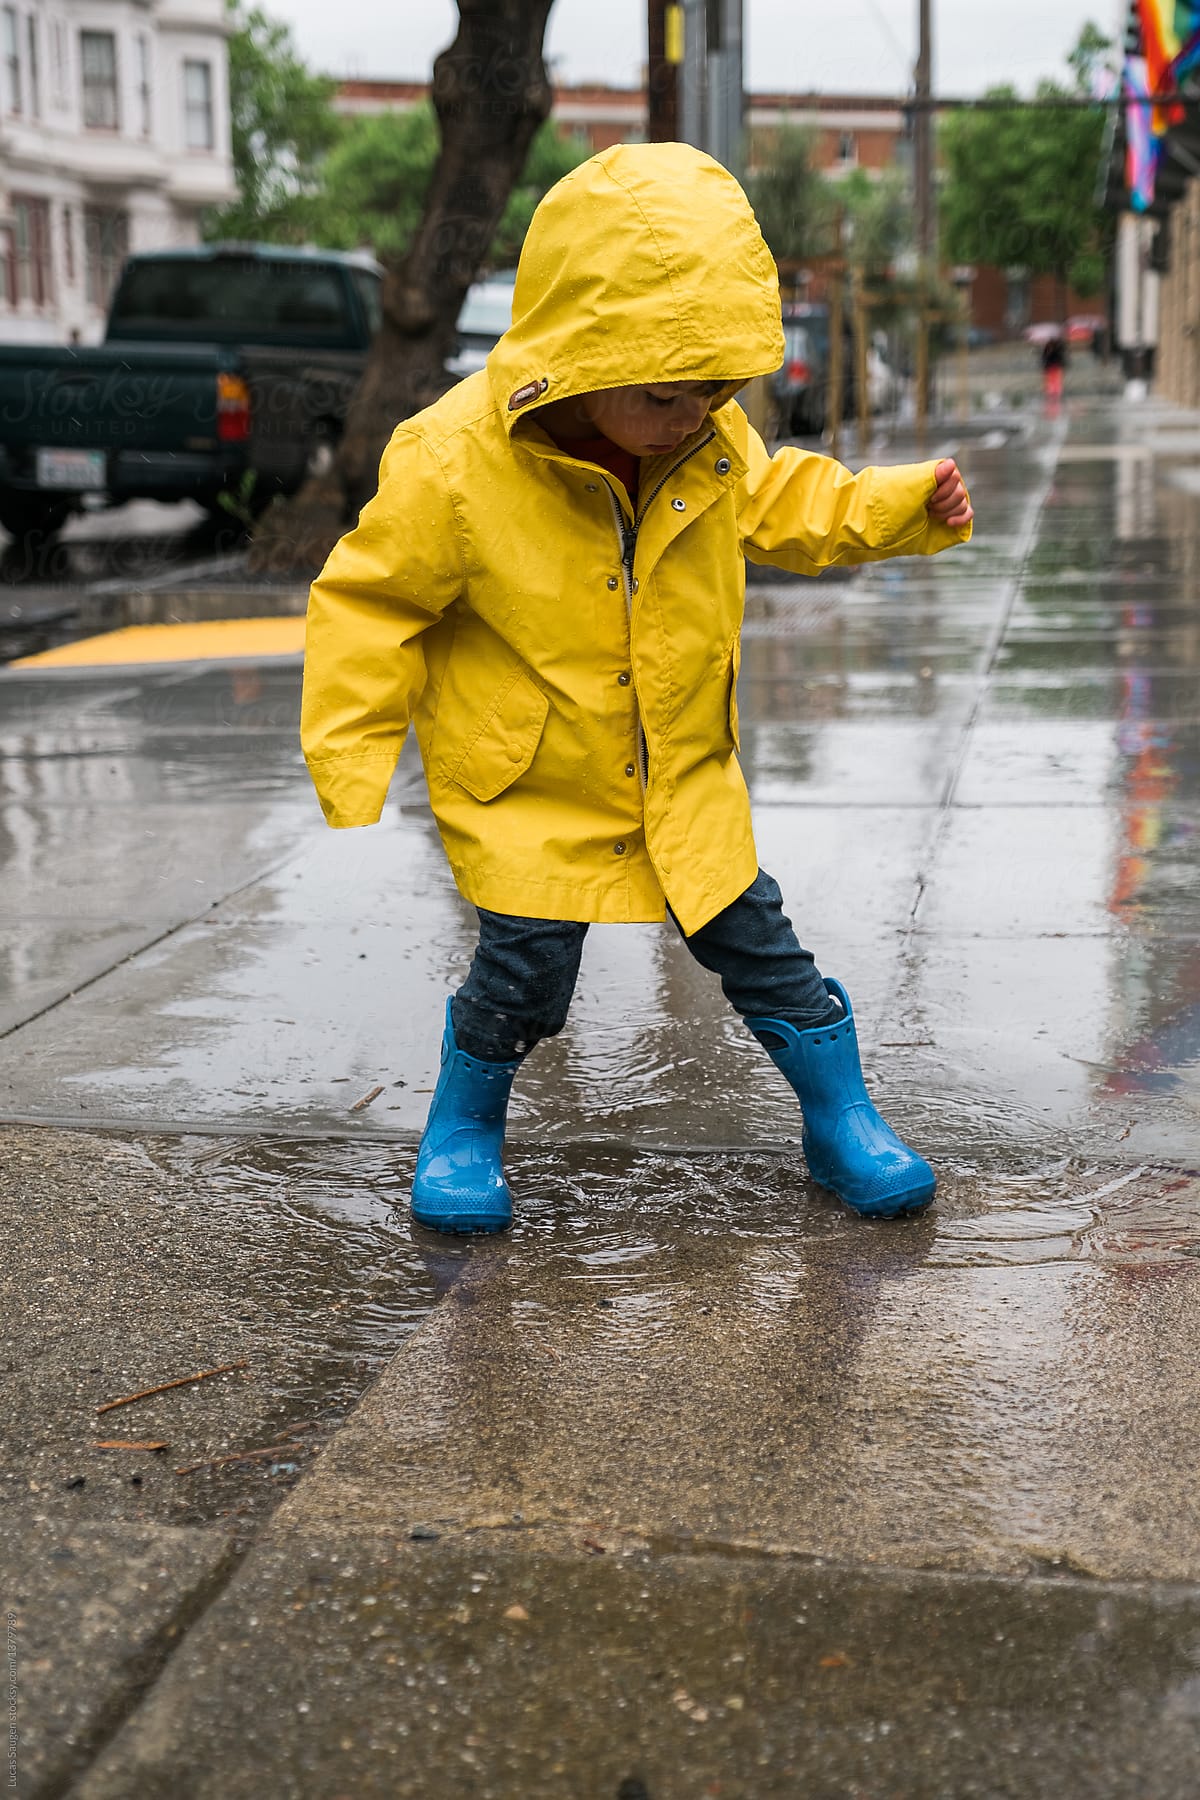 Small boy playing in puddle